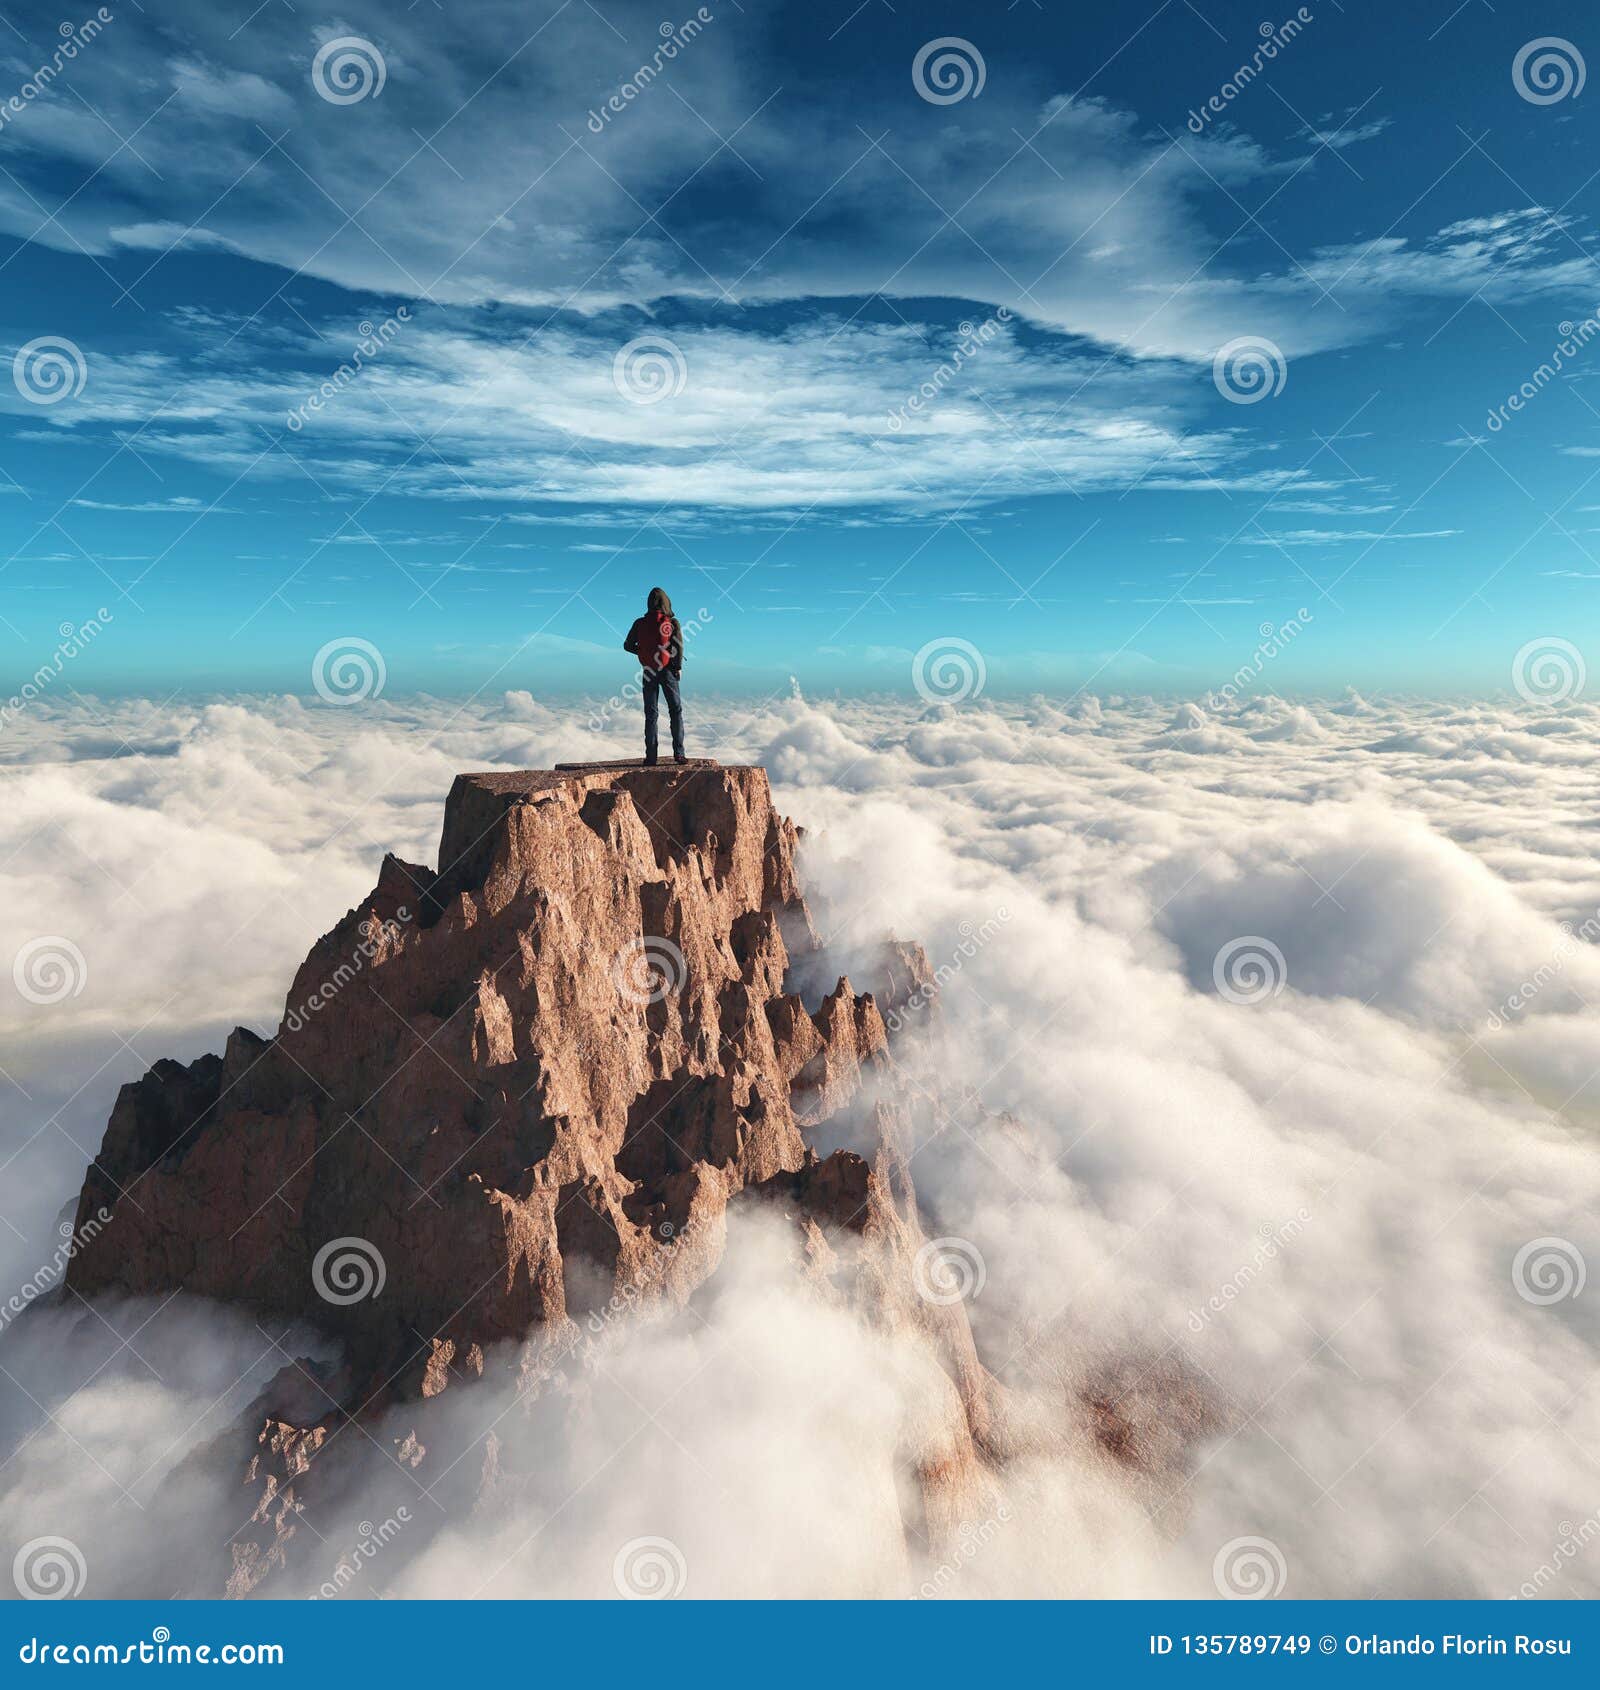 Hiker Man At The Top Of The Mountain Stock Illustration Illustration Of Outdoor Landscape